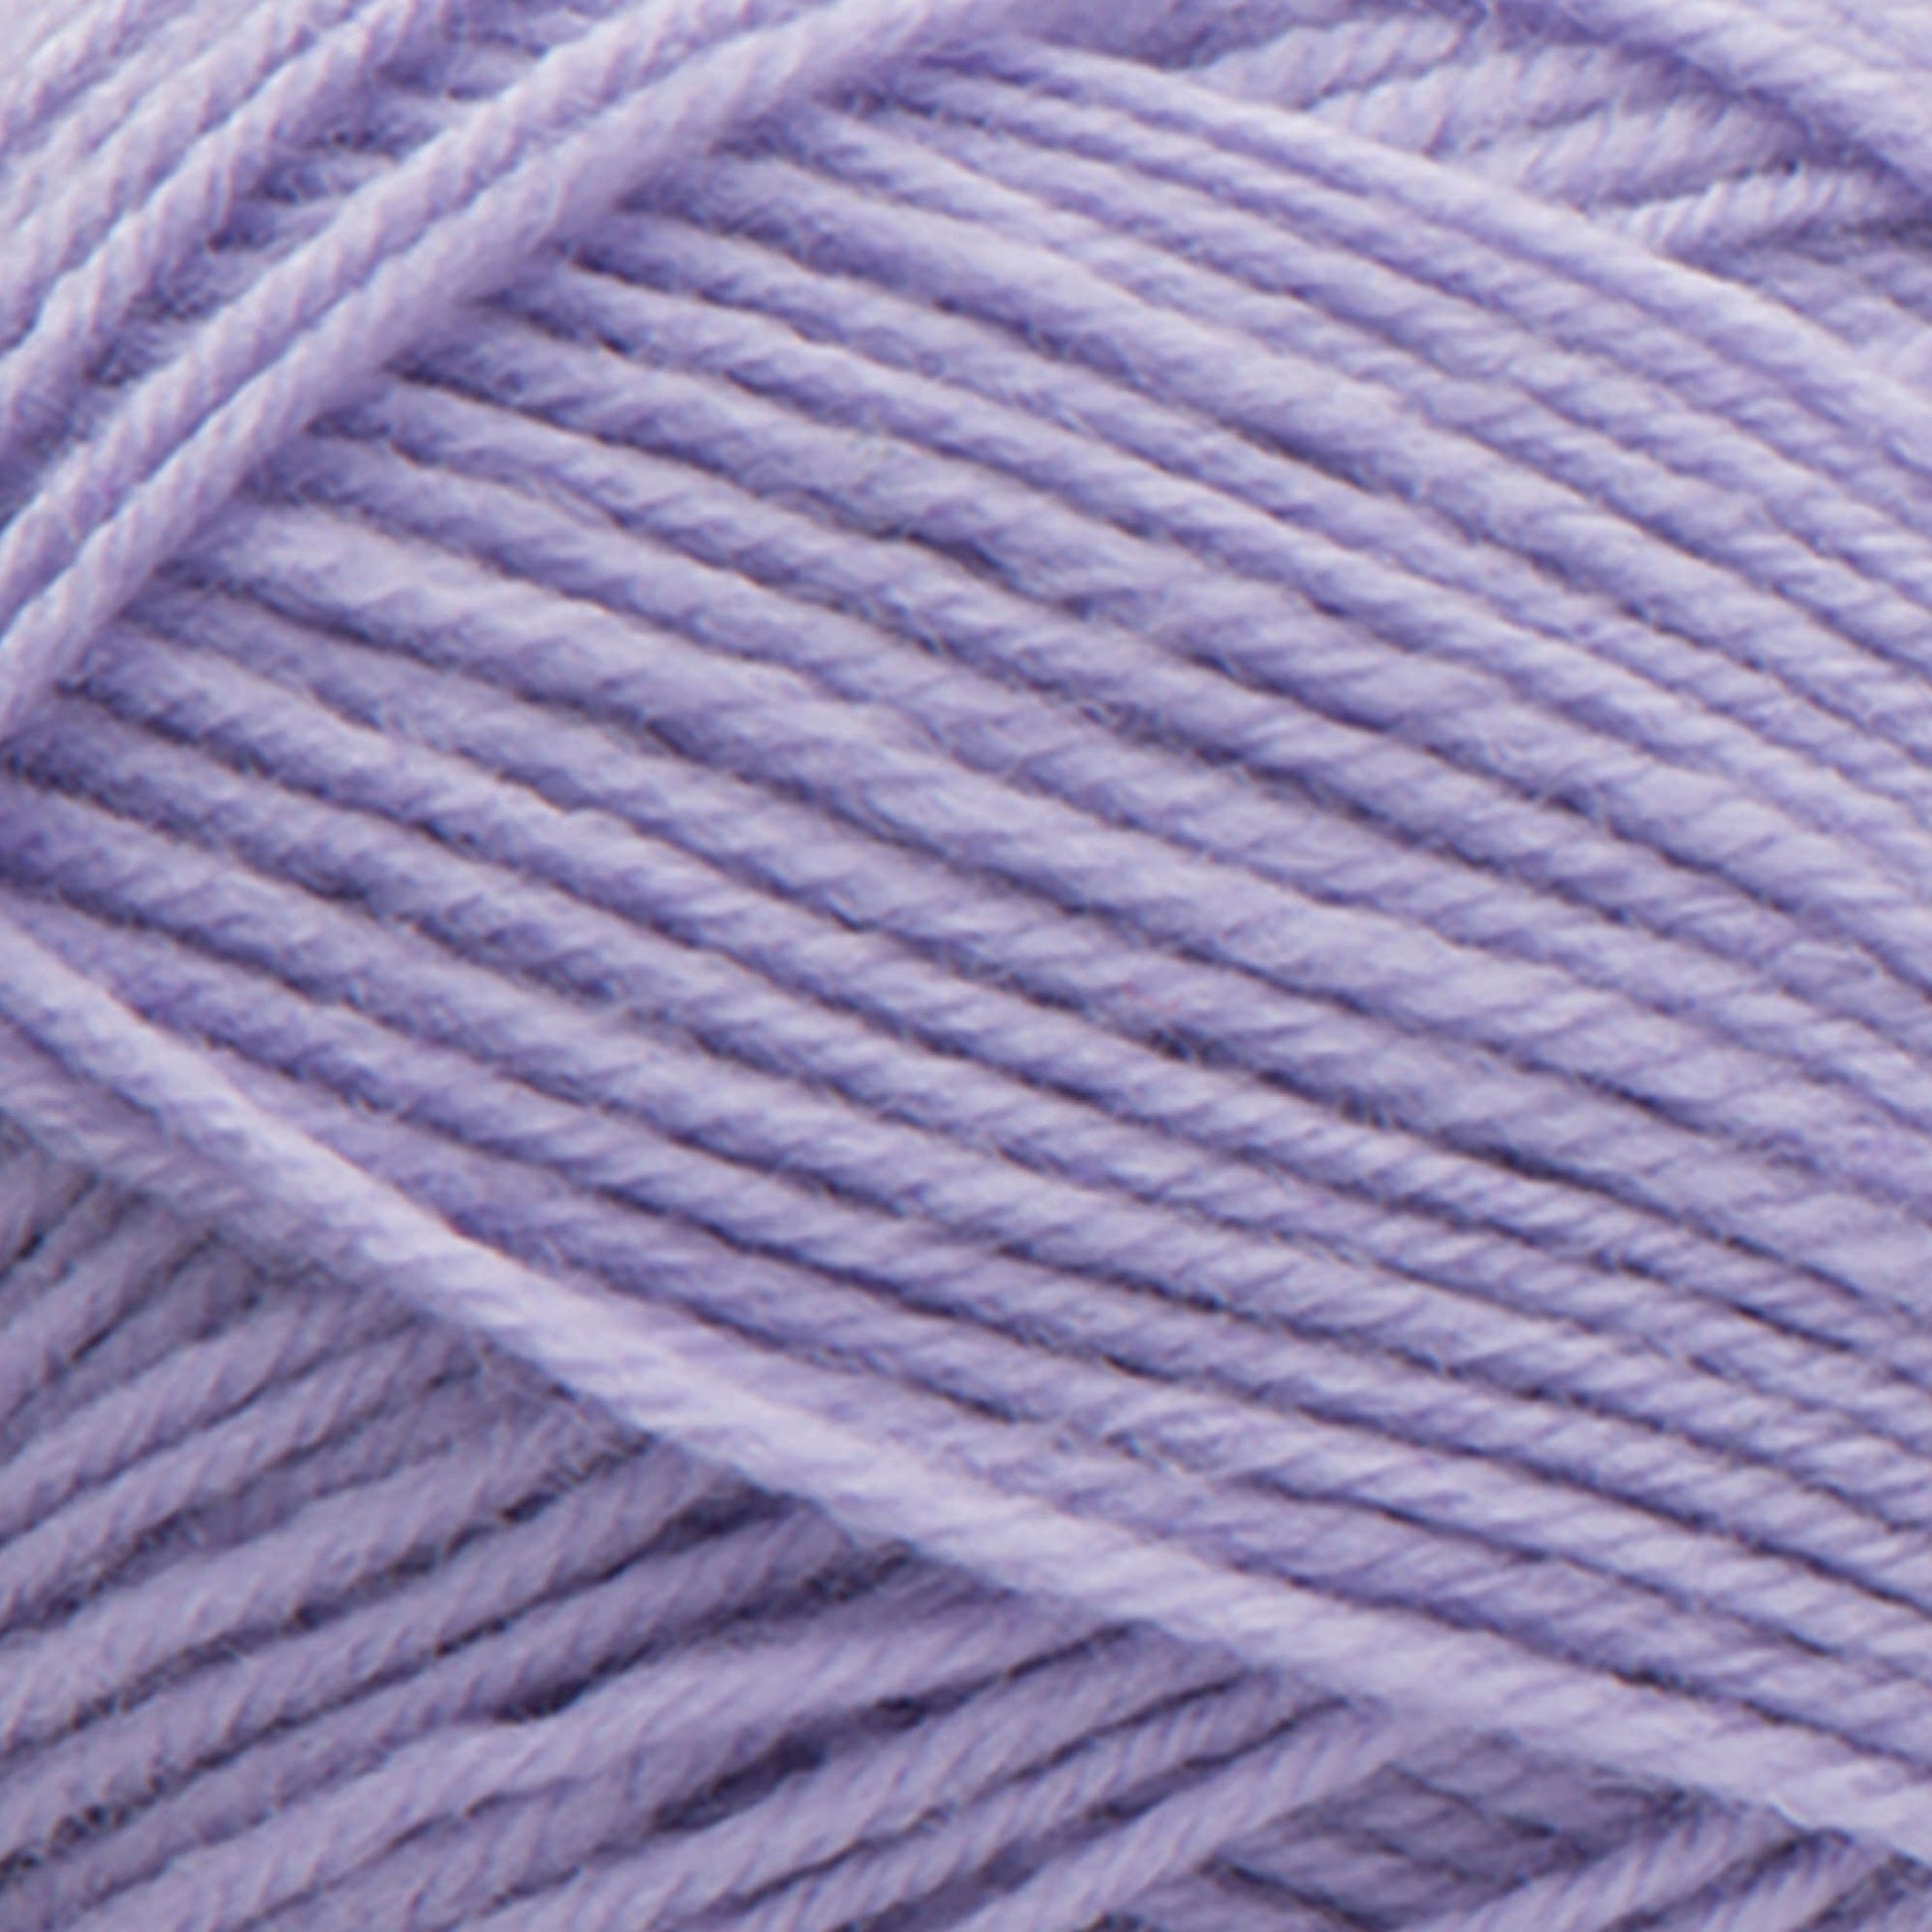 Caron Kindness Yarn - Discontinued Orchid